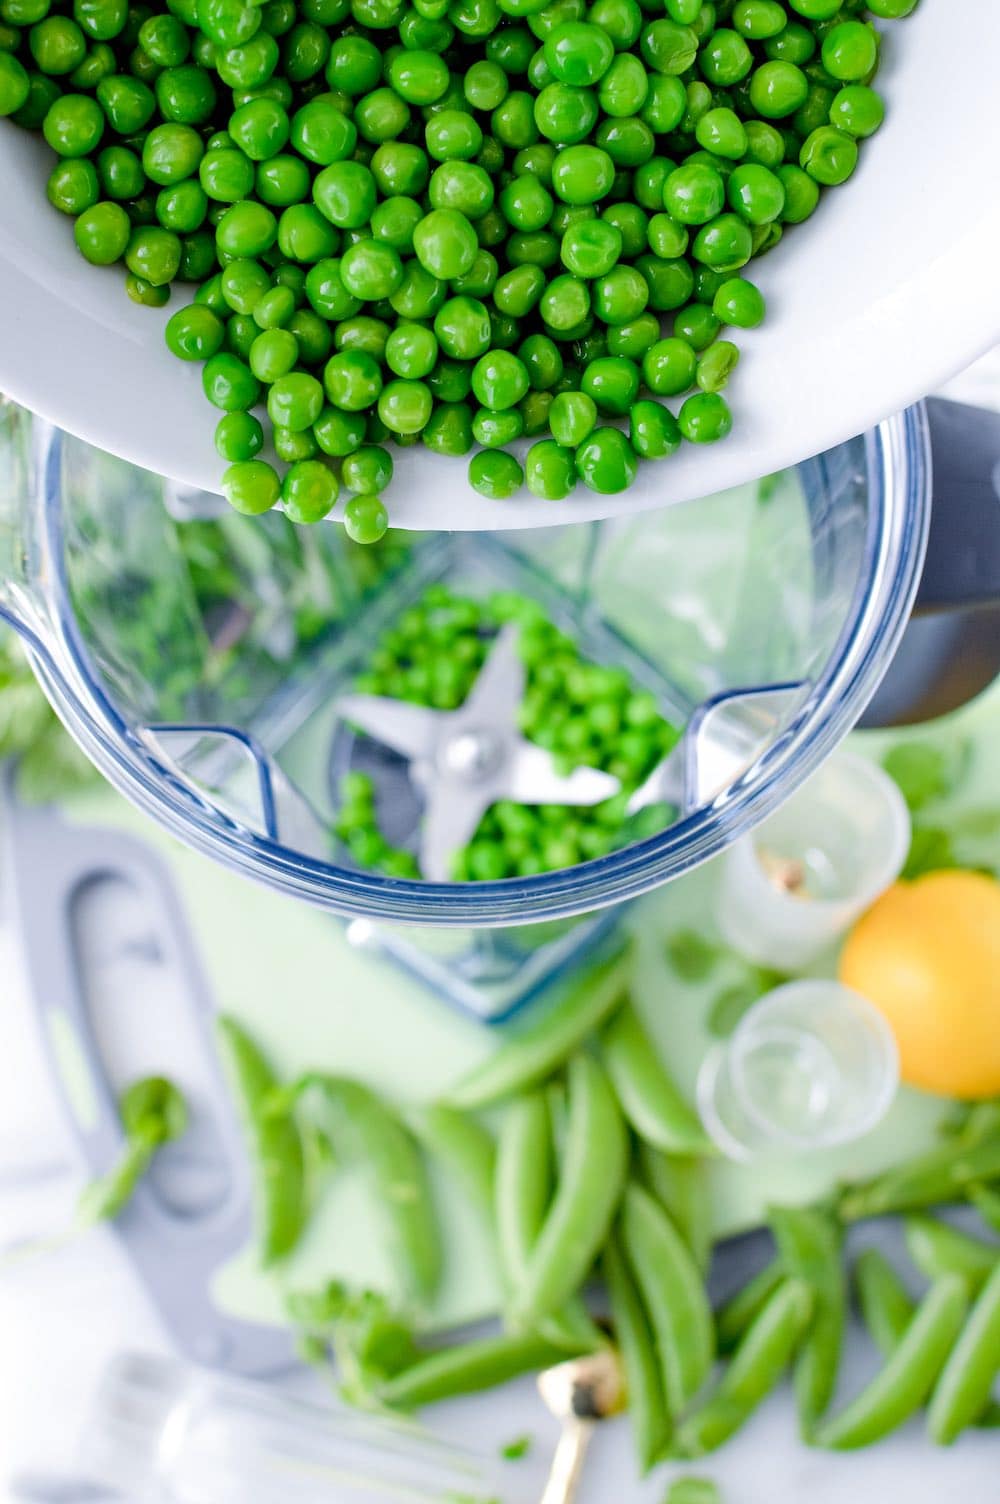 Adding the peas to the blender.